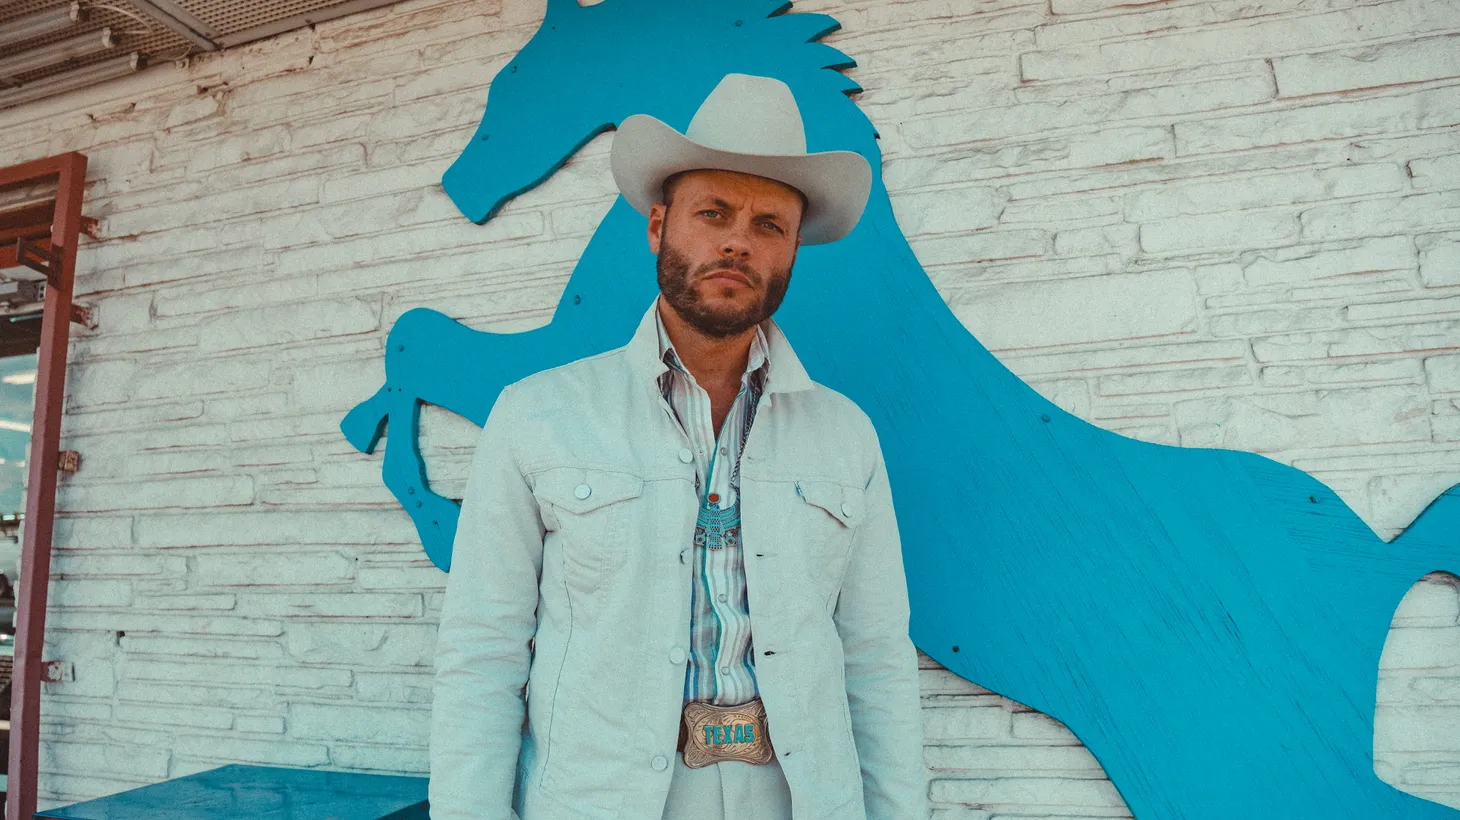 Austin-based Charley Crockett is on the short list for Artist of the Year at the Americana Music Association Award at Americana Fest in Nashville in September and he’s in great company.